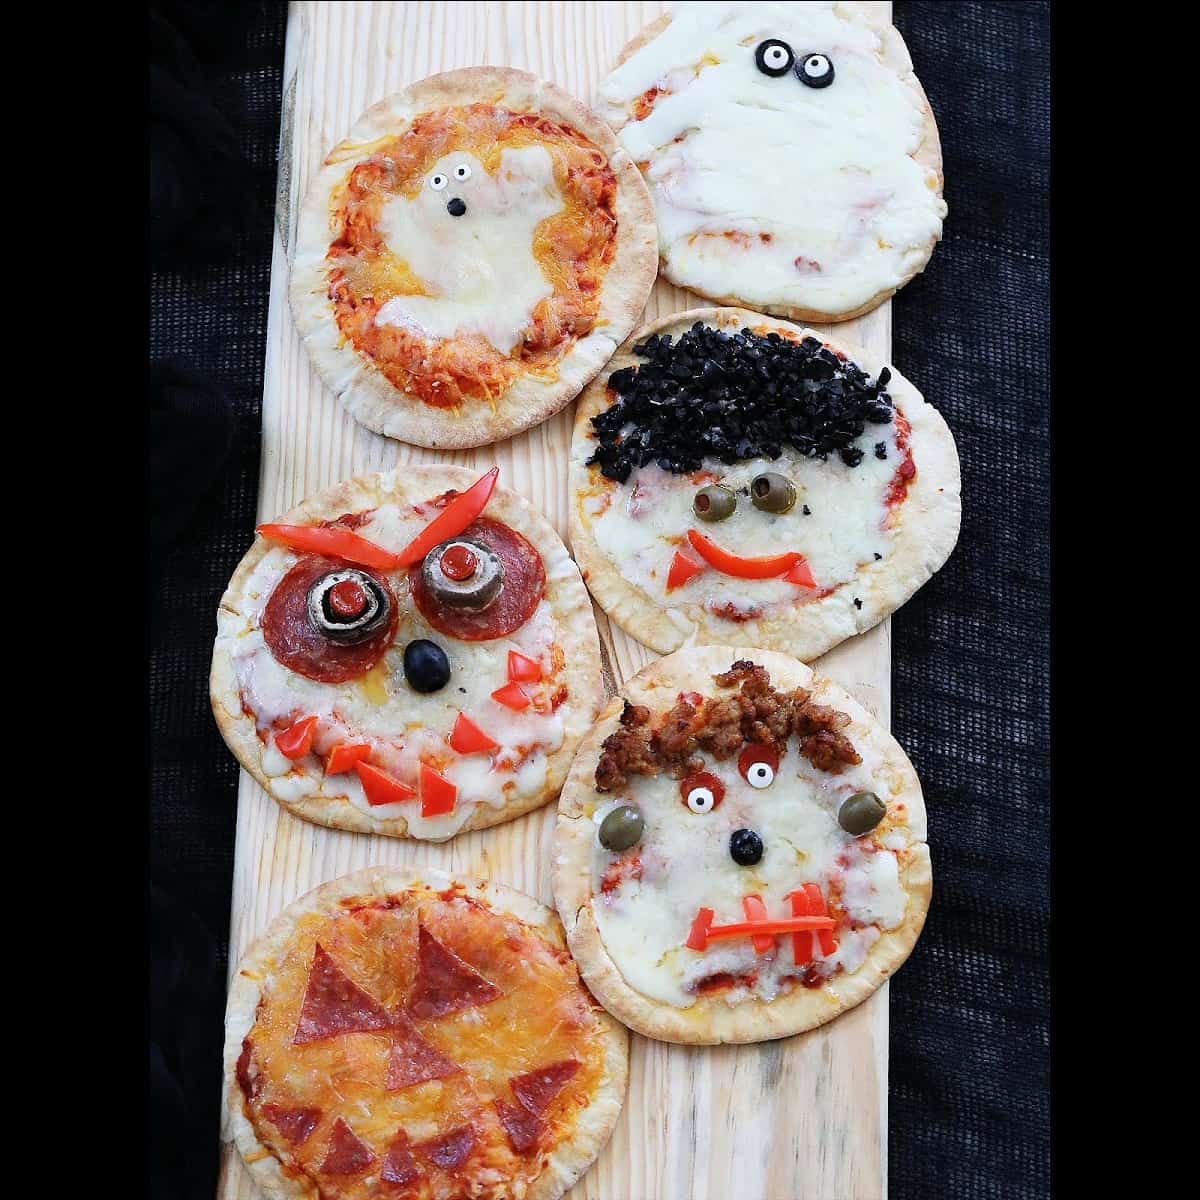 Six baked Halloween pizzas on a baking rack decorated to look like ghosts, pumpkins, dracula, frankenstein, and monsters.